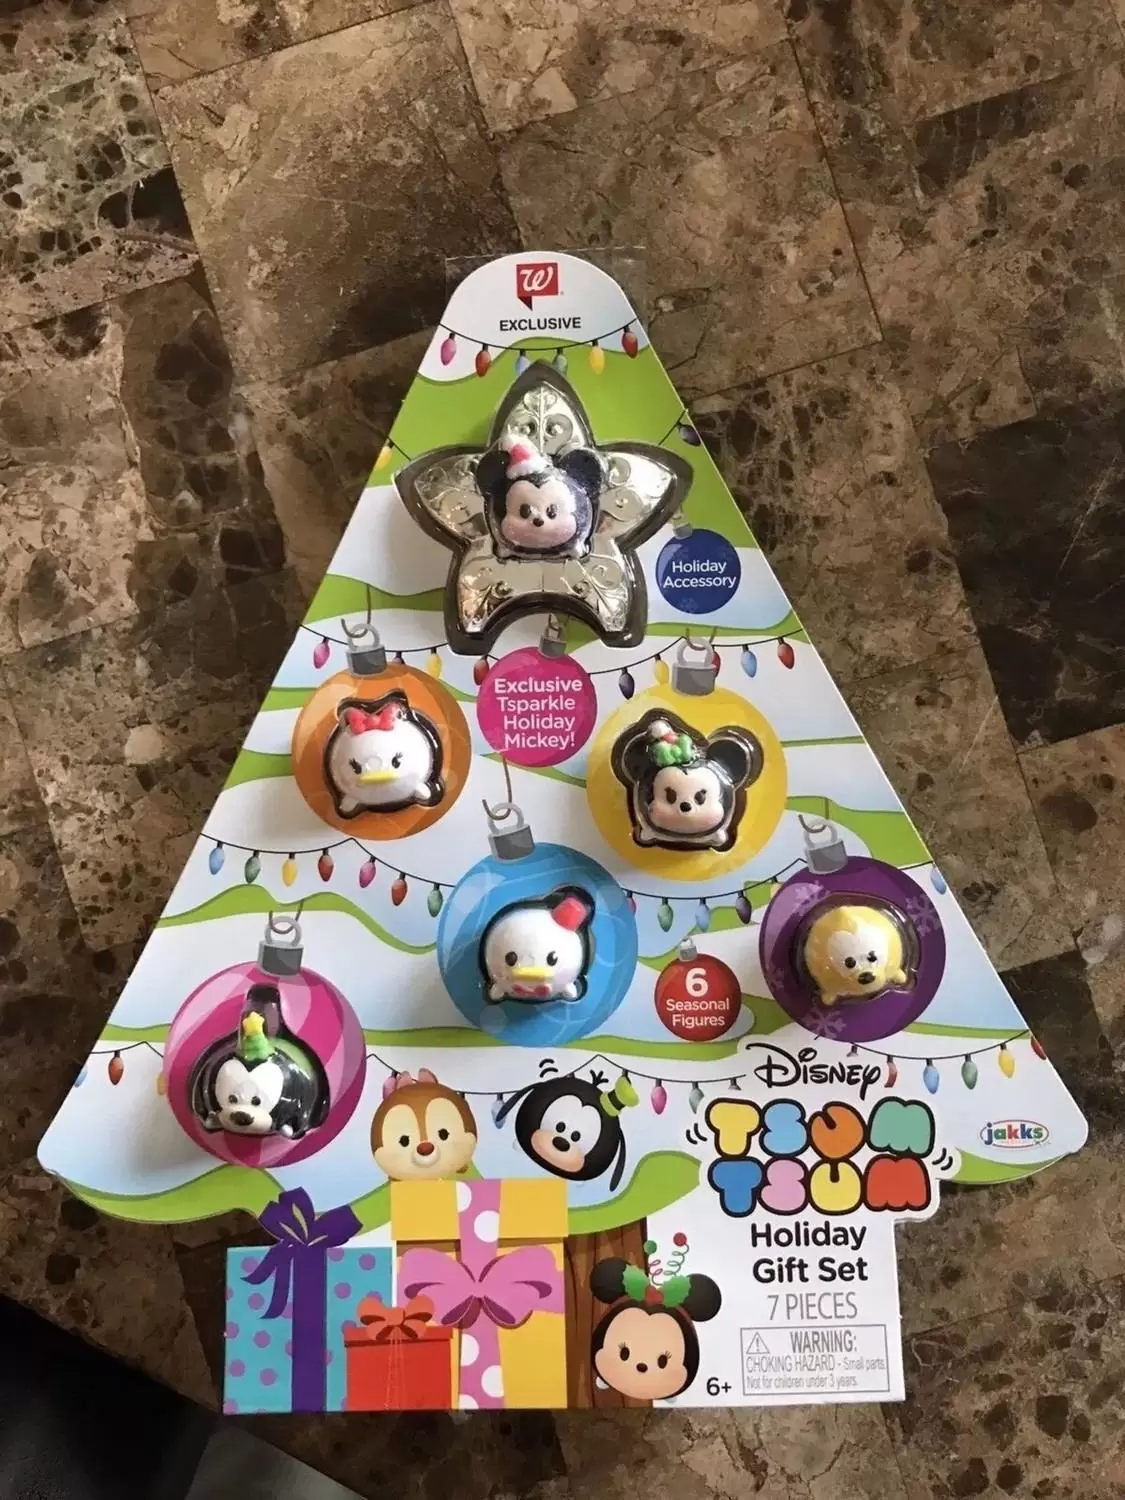 Tsum Tsum Jakks Pacific Exclusives And Sets - Holiday Gift Set 7 Pieces